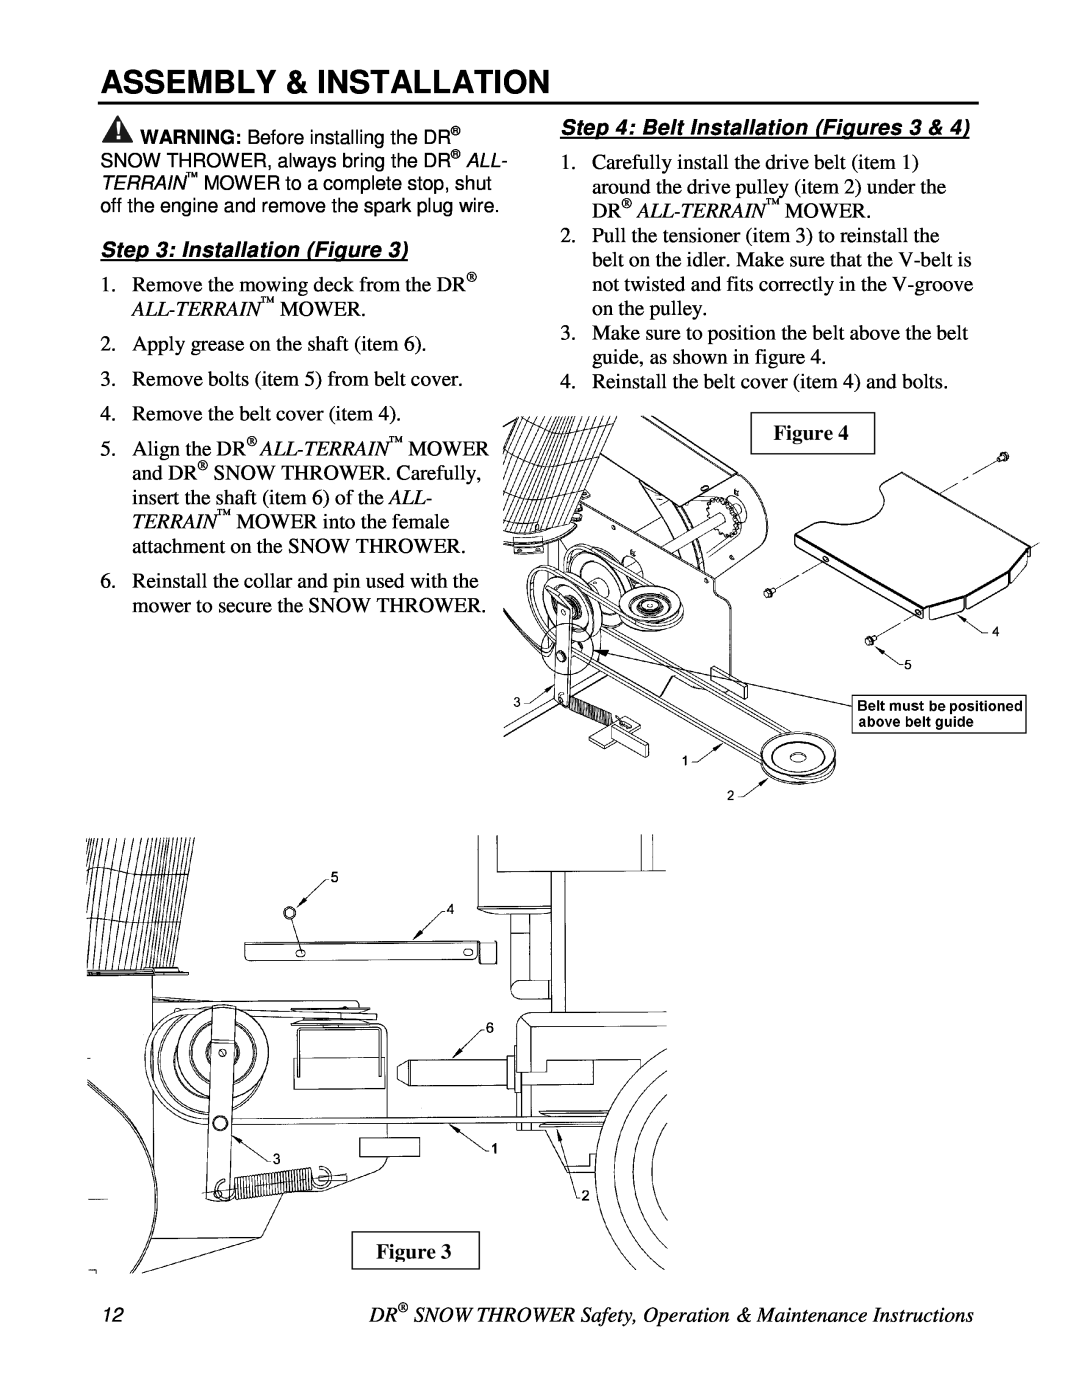 Country Home Products A2080BMA, A2080BEA manual All-Terrain Mower, Belt Installation Figures, Assembly & Installation 